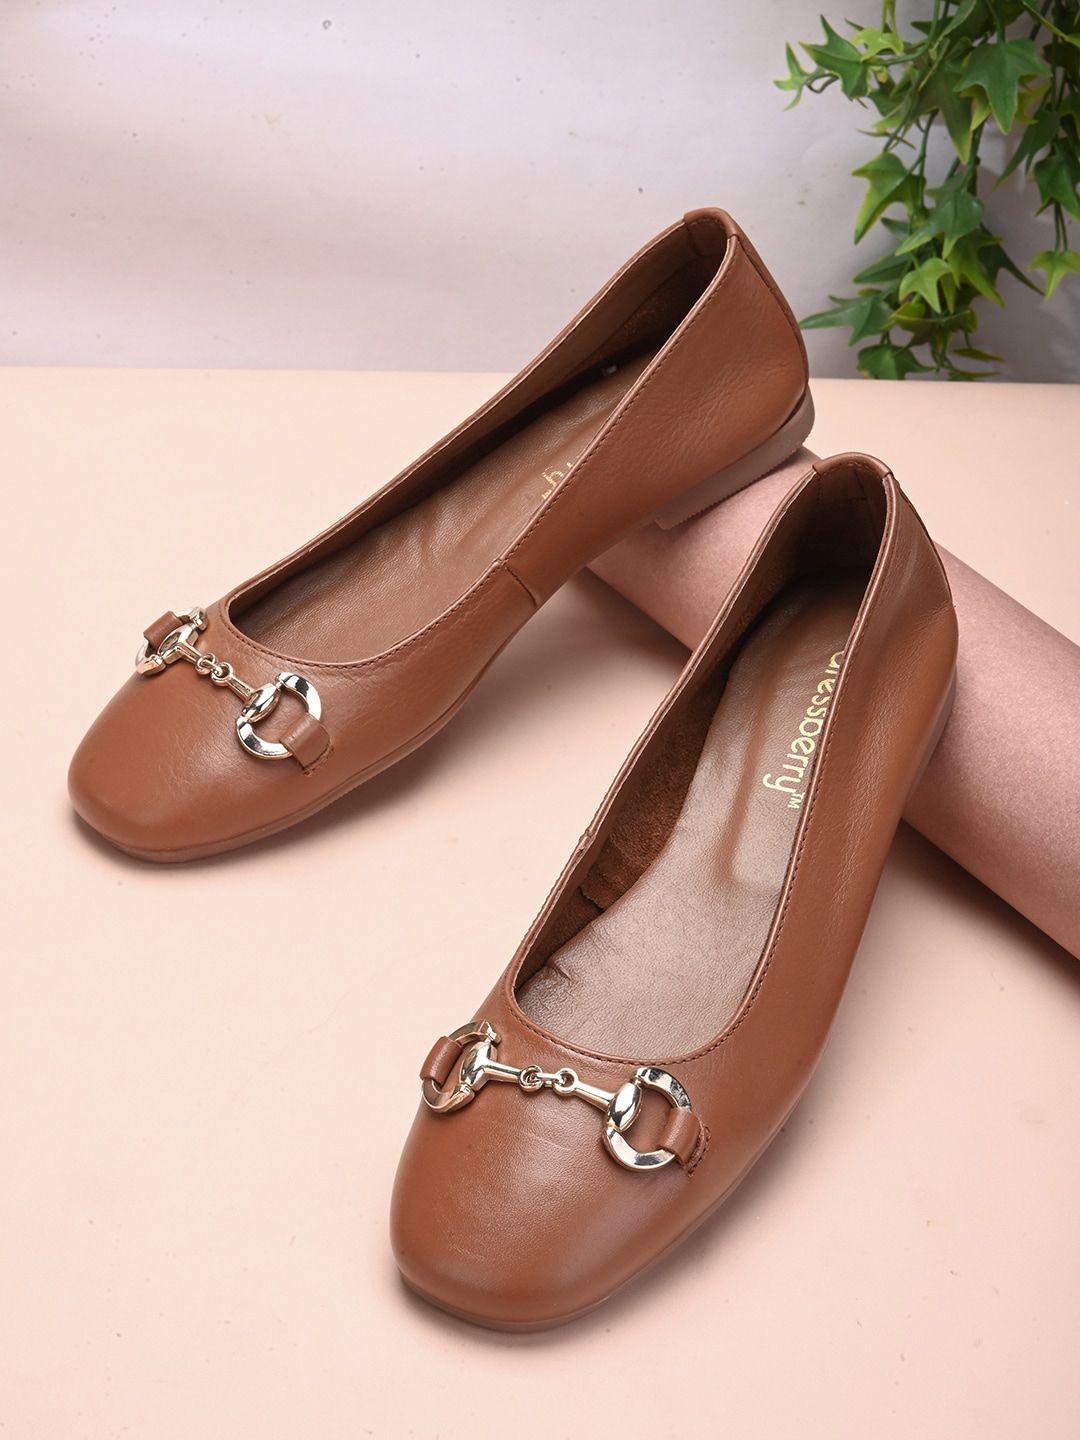 dressberry tan brown and gold-toned buckle embellished ballerinas